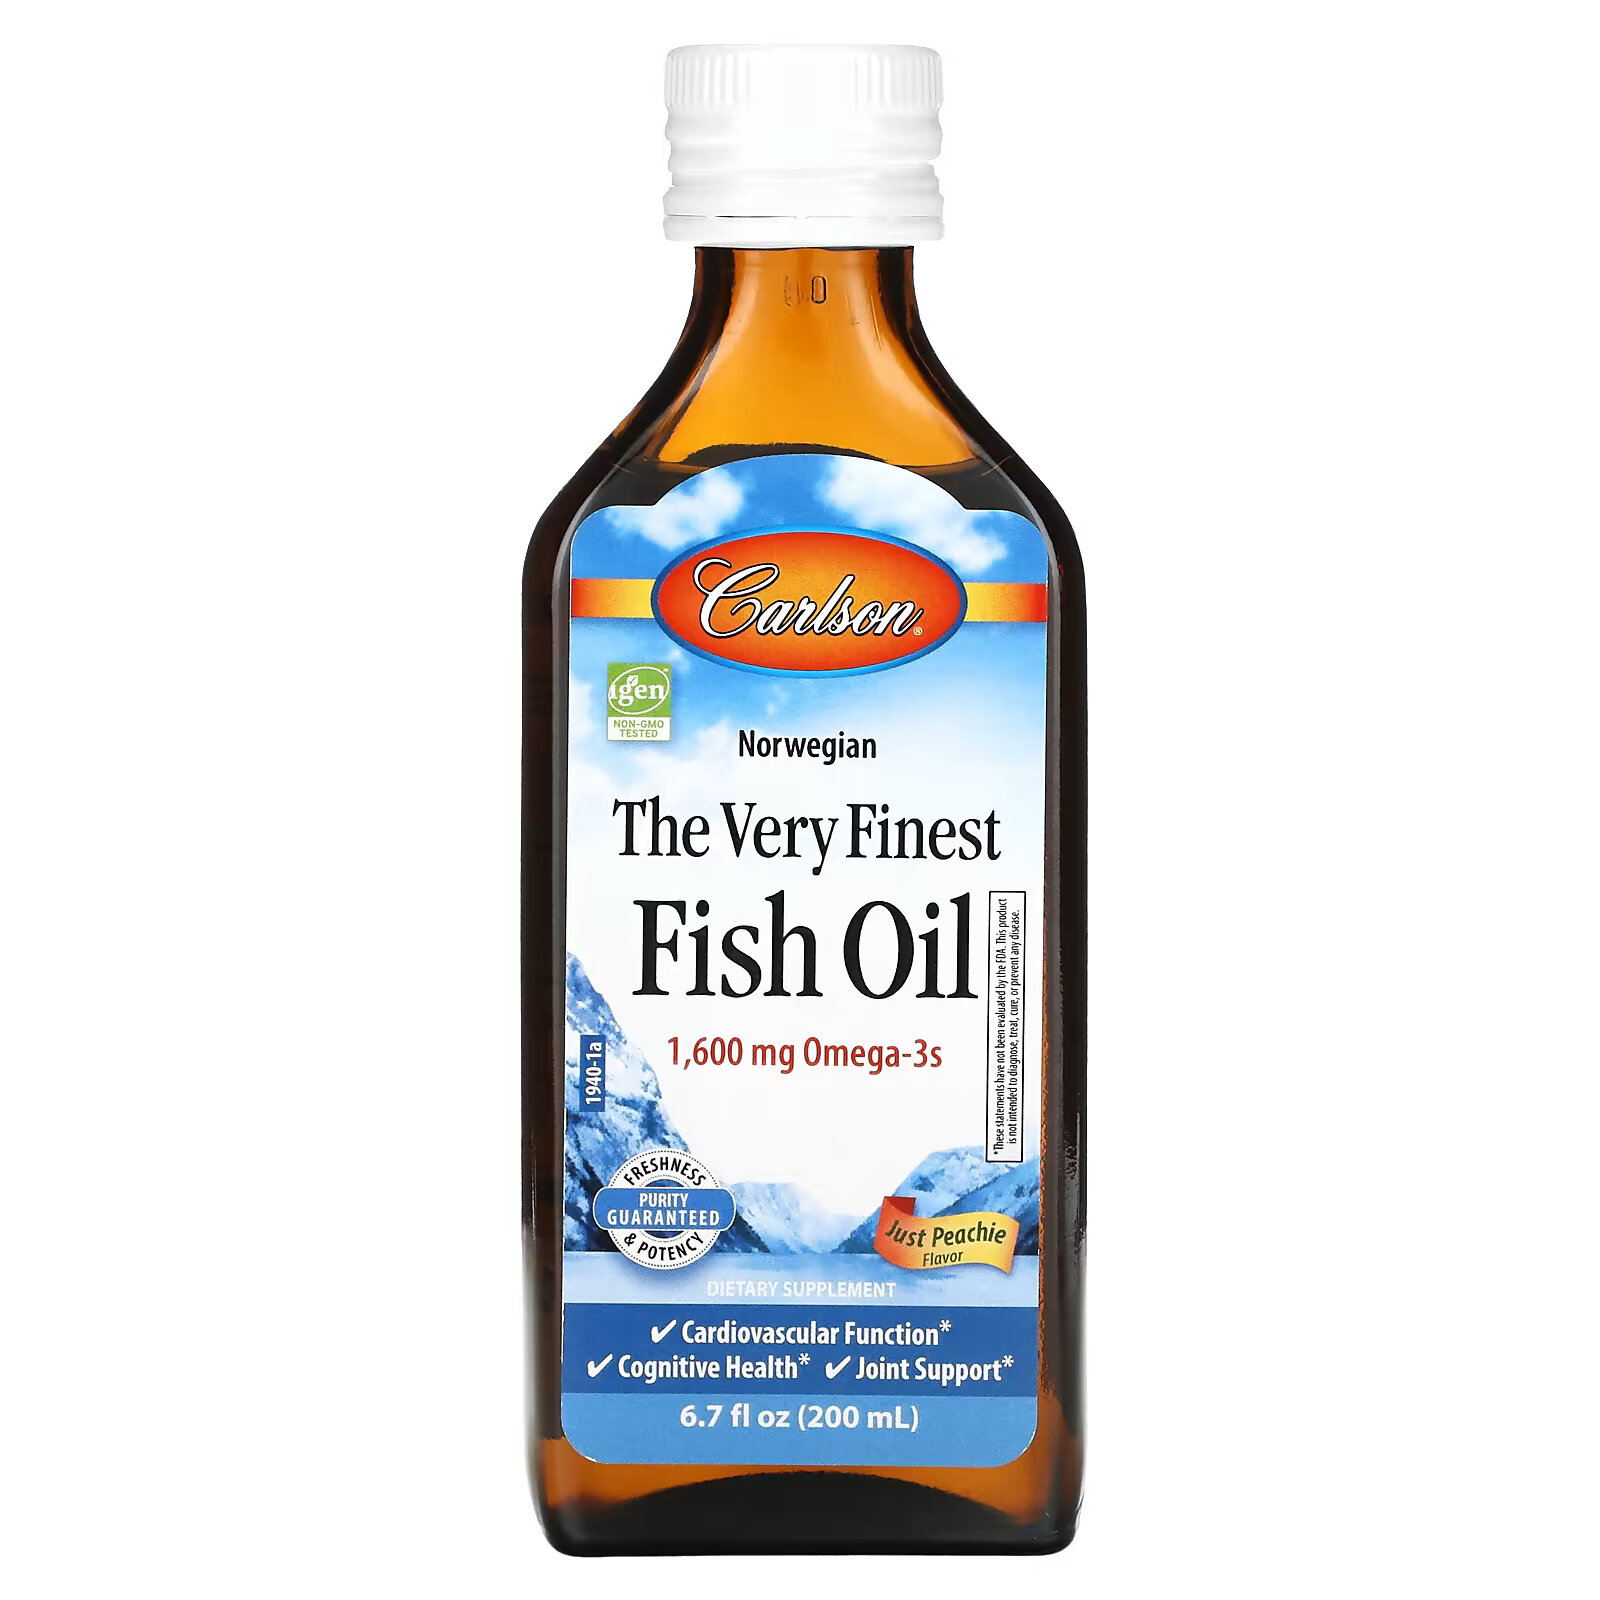 Carlson, The Very Finest Fish Oil, Just Peachie, 1,600 mg, 6.7 fl oz (200 ml) carlson the very finest fish oil just peachie 1 600 mg 6 7 fl oz 200 ml